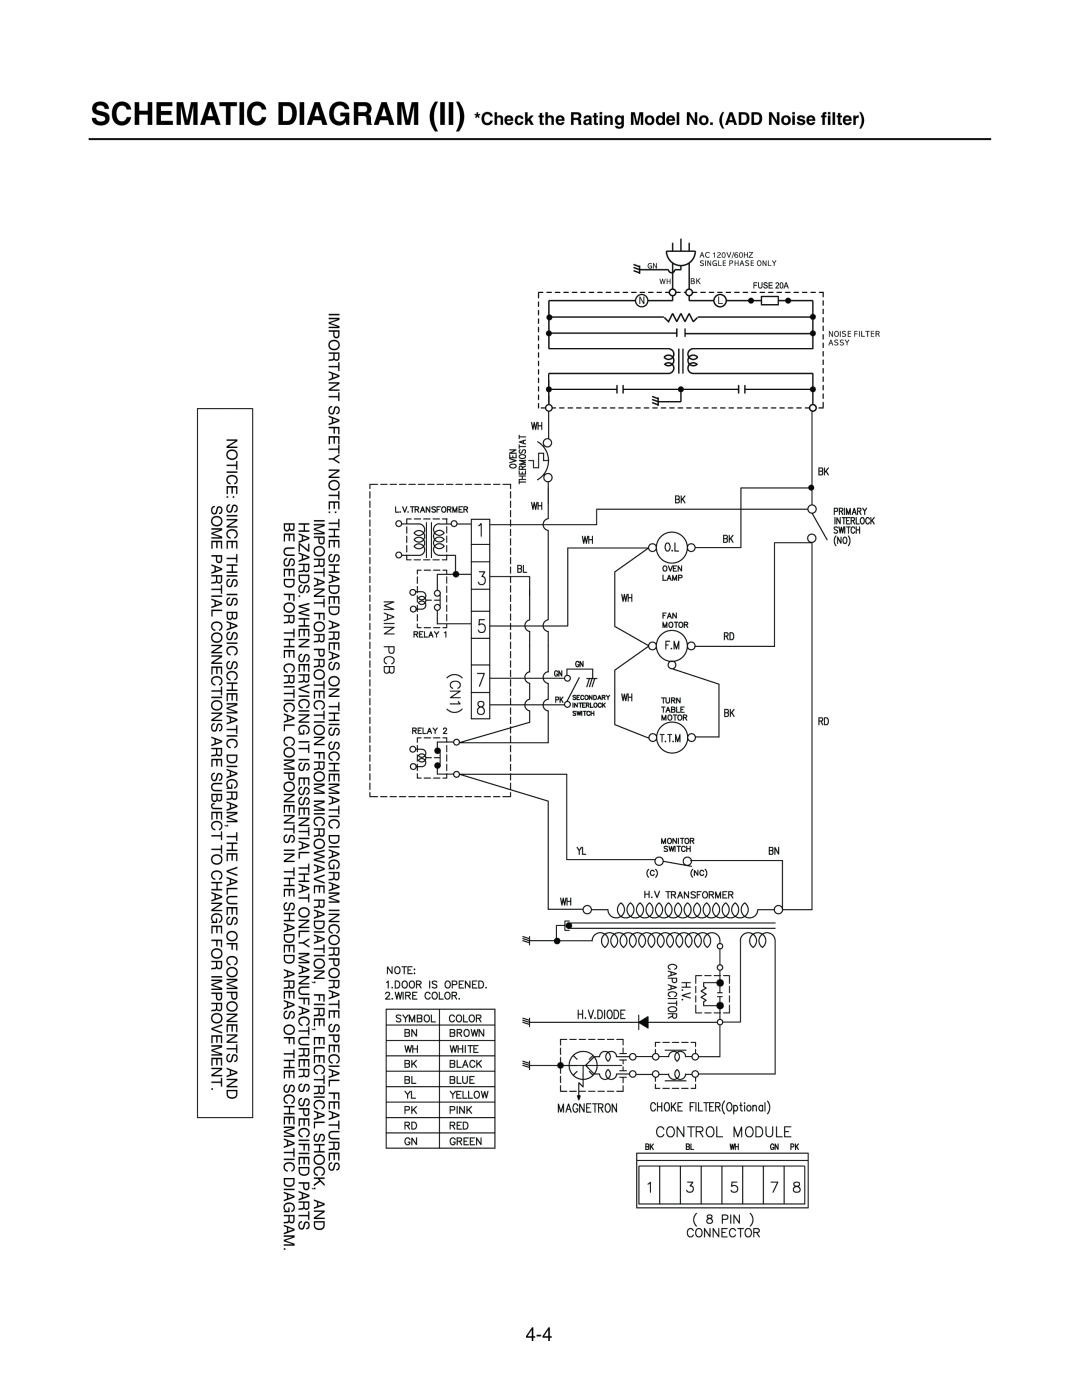 GE LMAB1240ST service manual SCHEMATIC DIAGRAM II *Check the Rating Model No. ADD Noise filter 